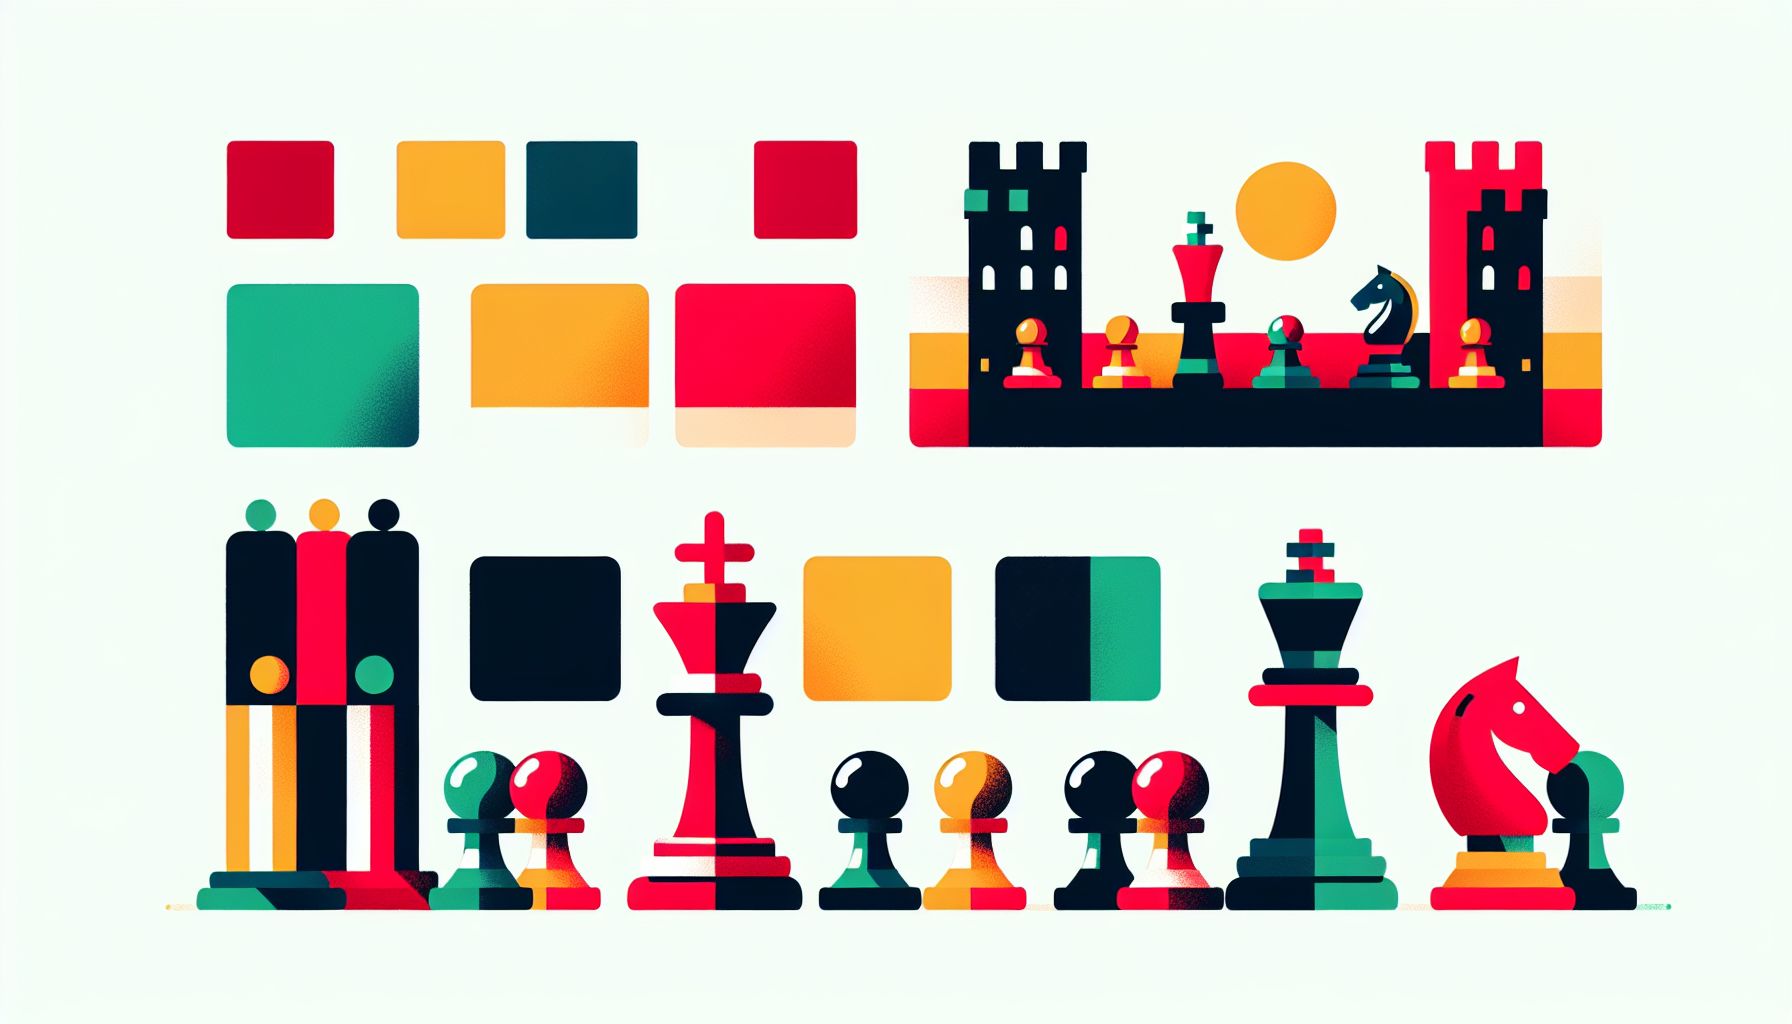 Chess in flat illustration style and white background, red #f47574, green #88c7a8, yellow #fcc44b, and blue #645bc8 colors.